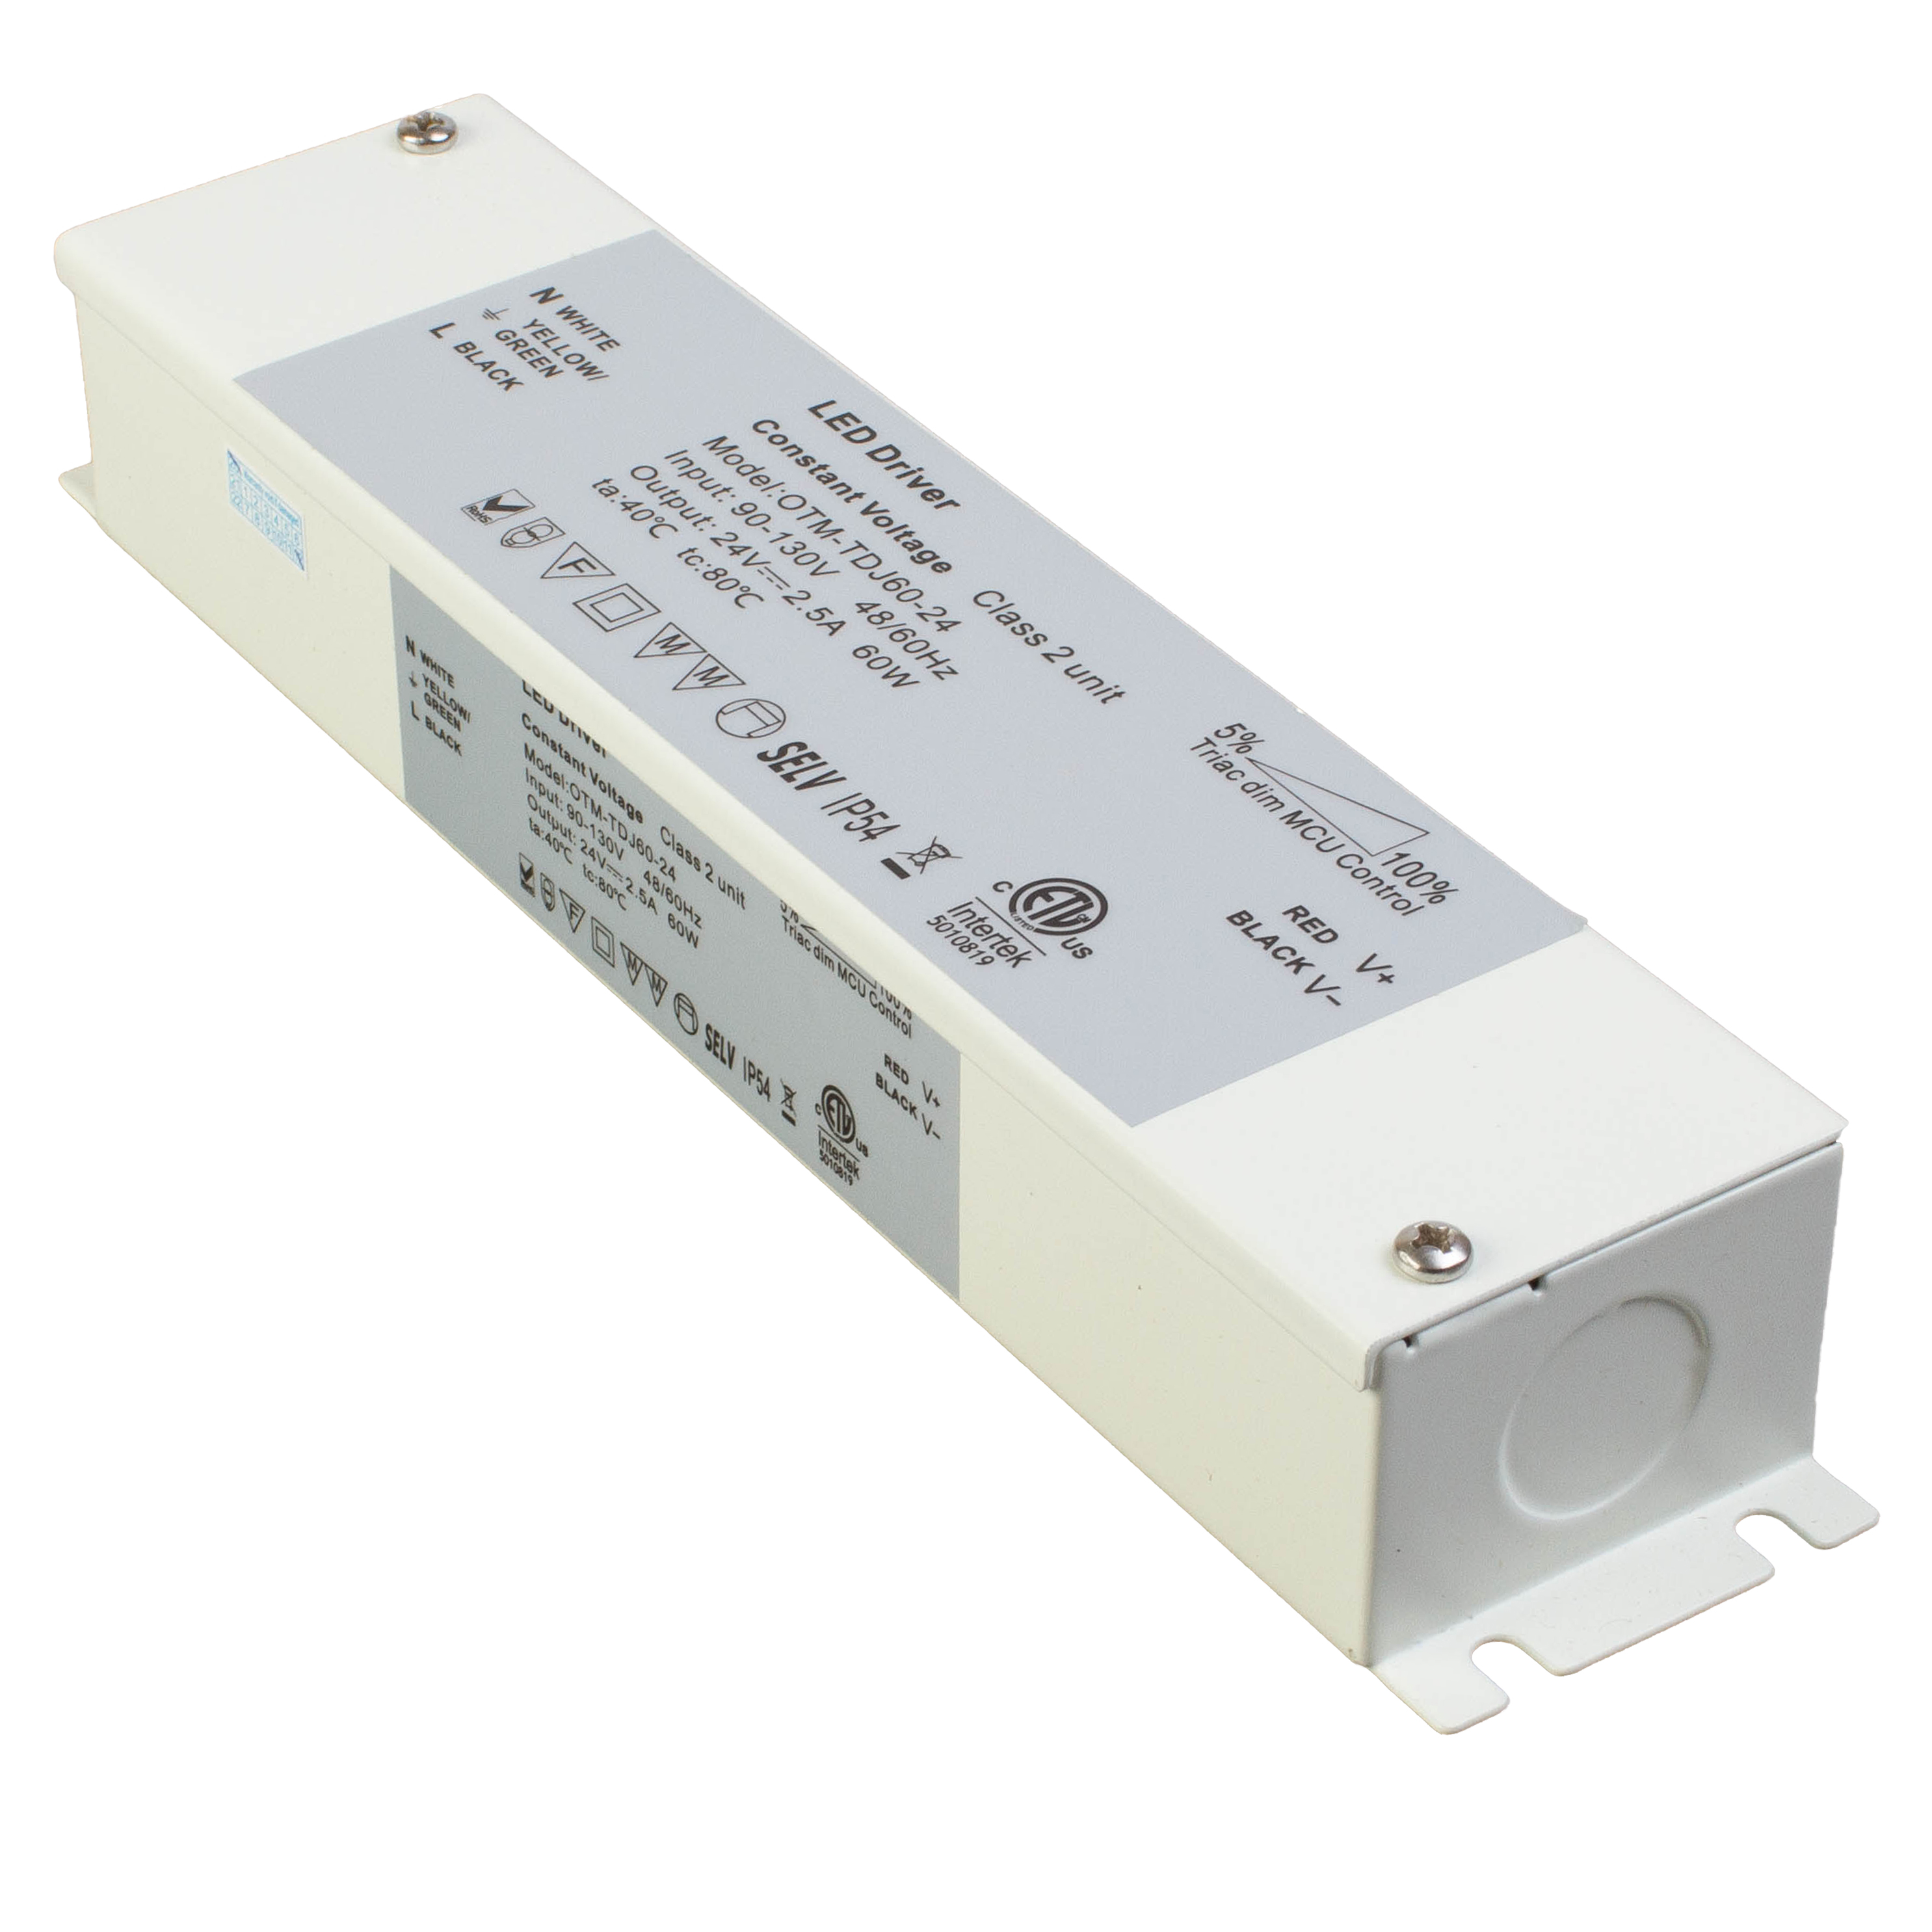 LEDupdates Dimmable LED Driver Triac, 24v 60w 2.5A Power Supply, ETL  Listed, Metal Junction Box Built-in AC to DC Class Compatible with most AC  Wall Dimmer for LED Light Strip